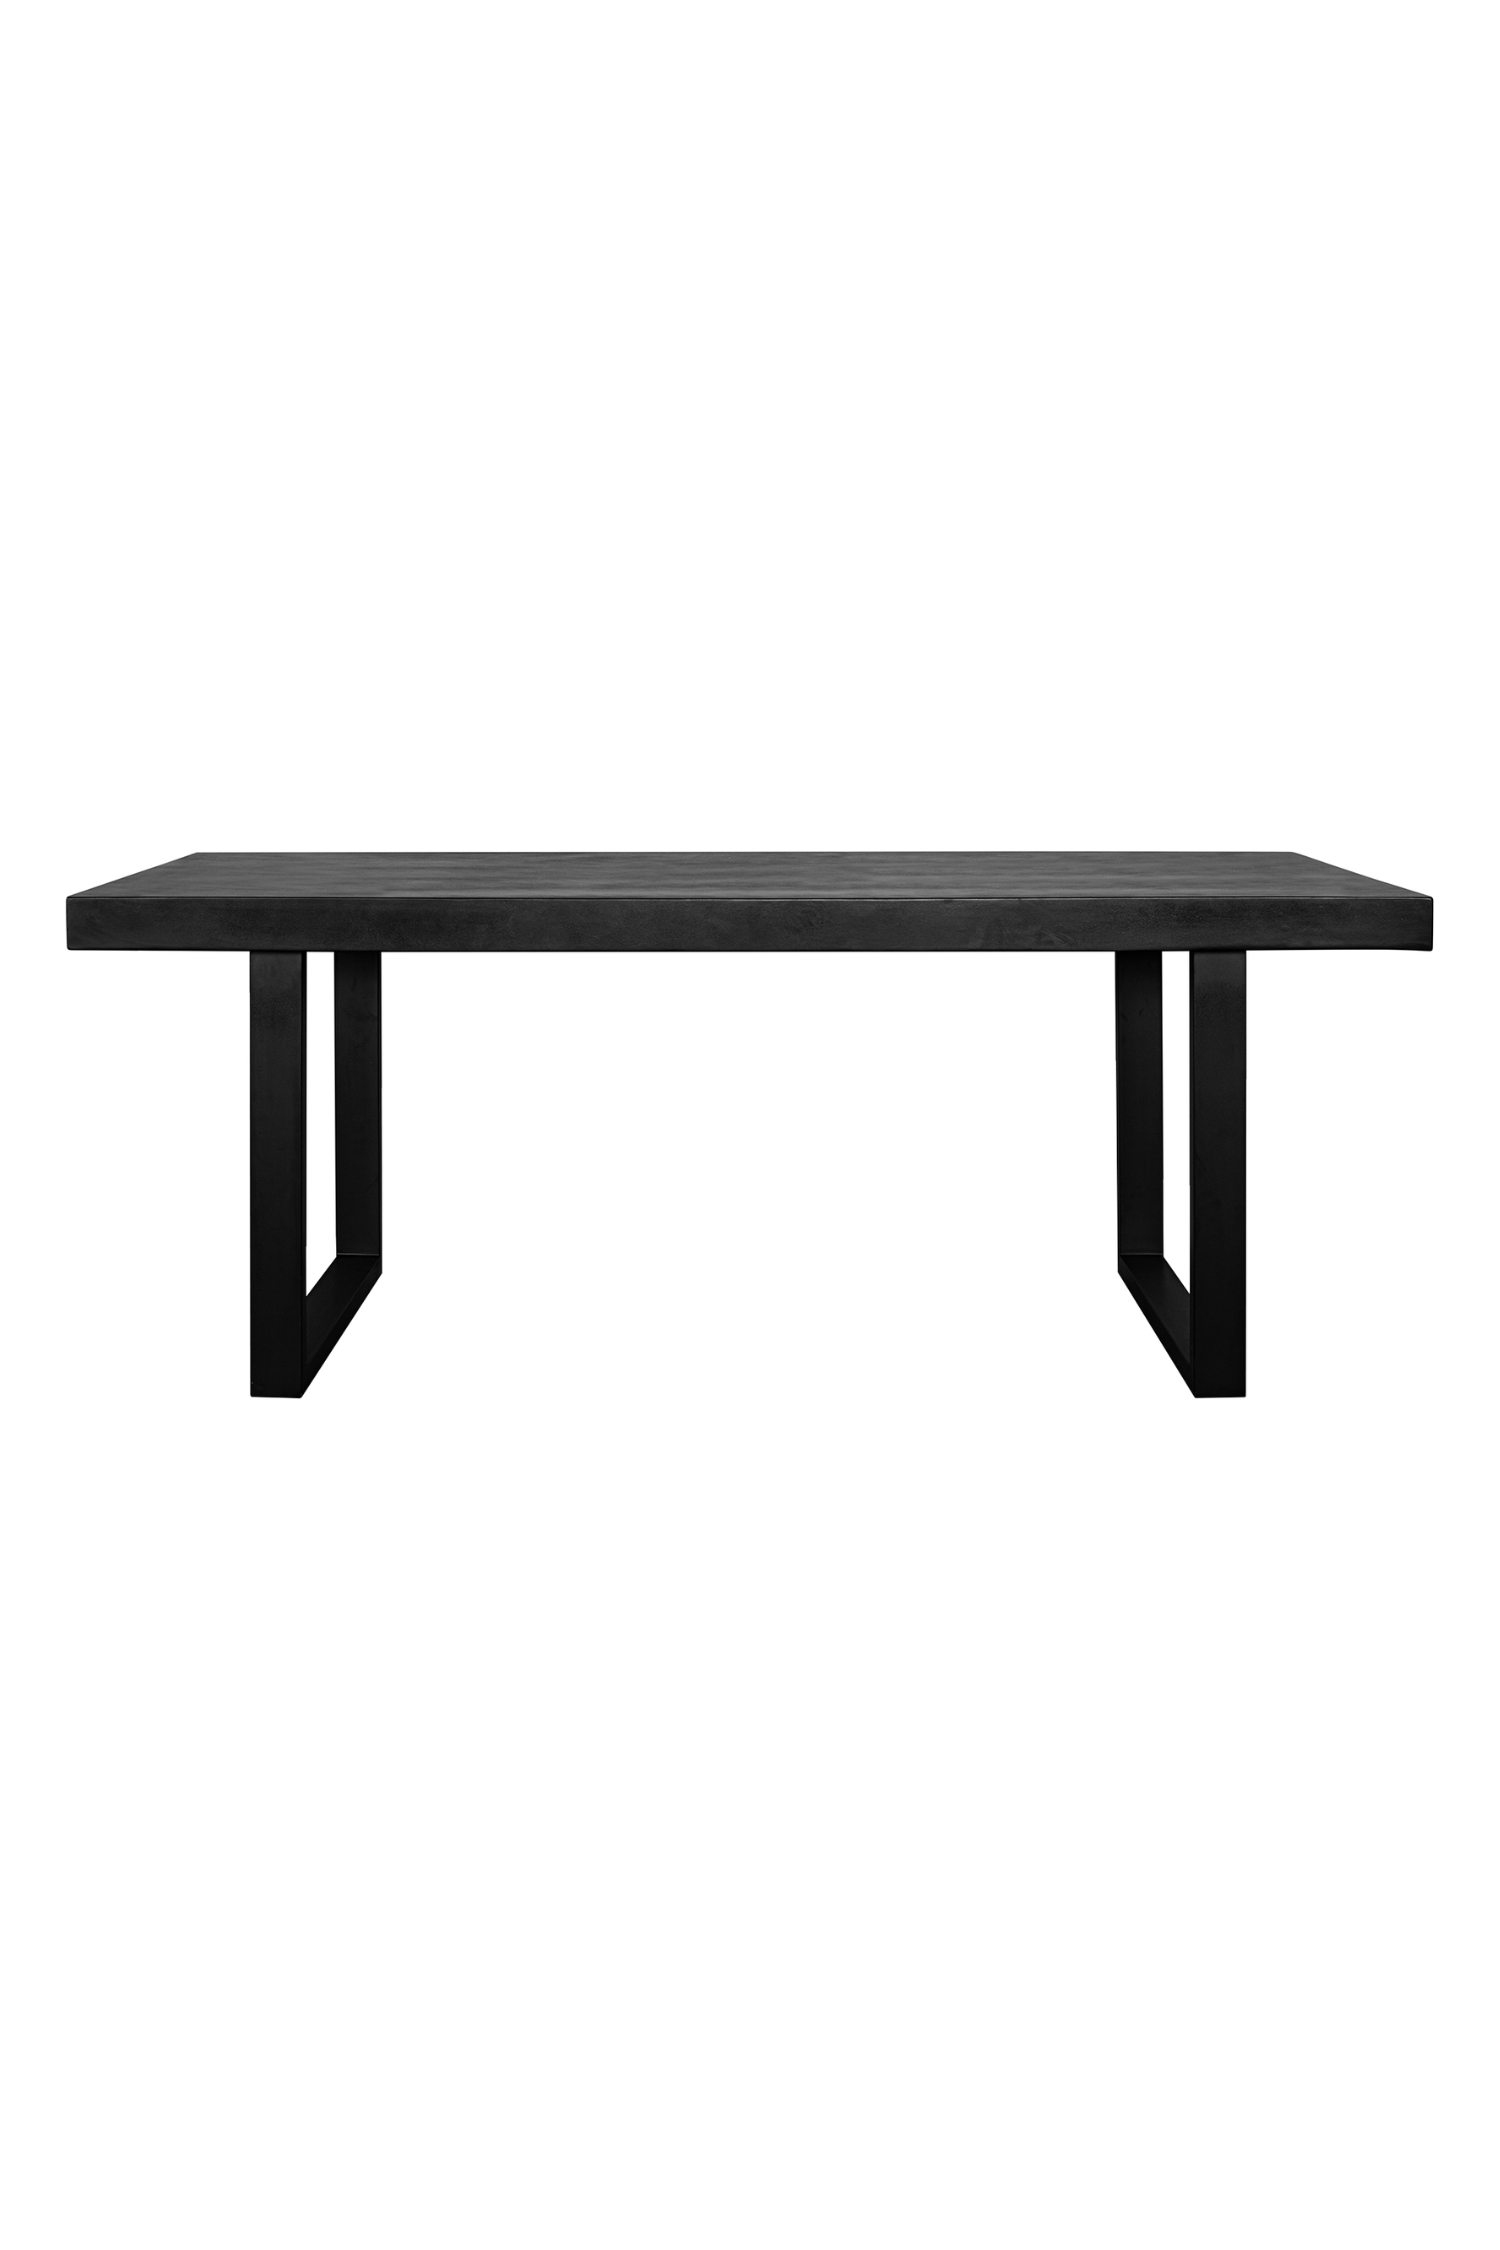 Jericho Outdoor Dining Table - 2 Styles